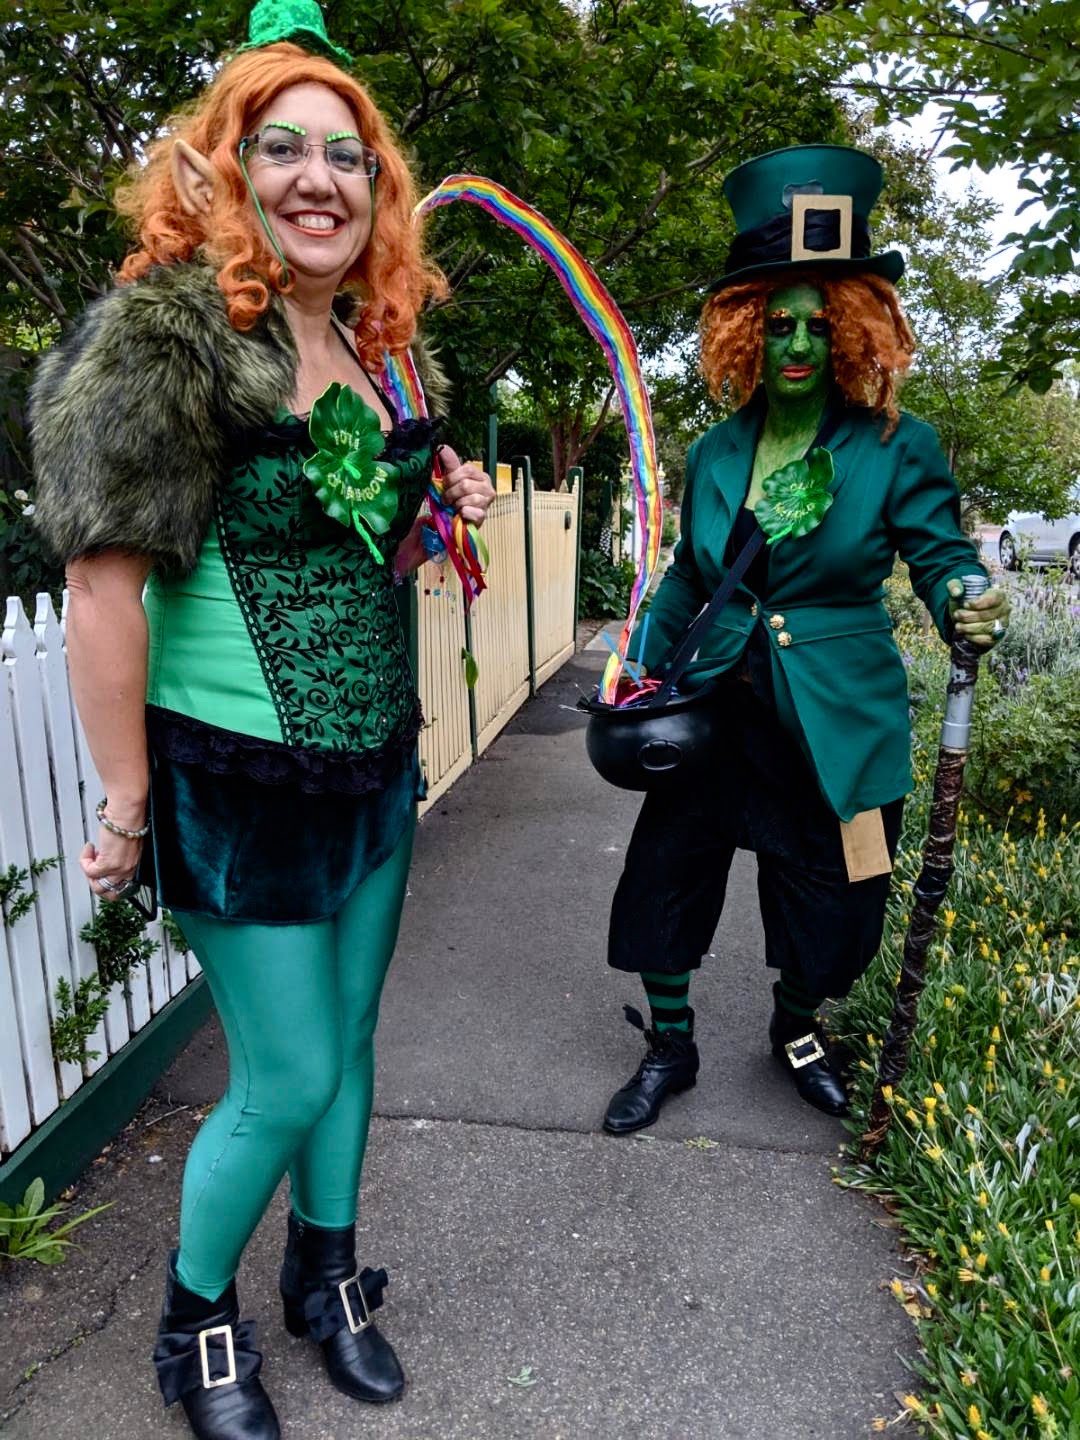 Featured image for “2 x Leprechauns”